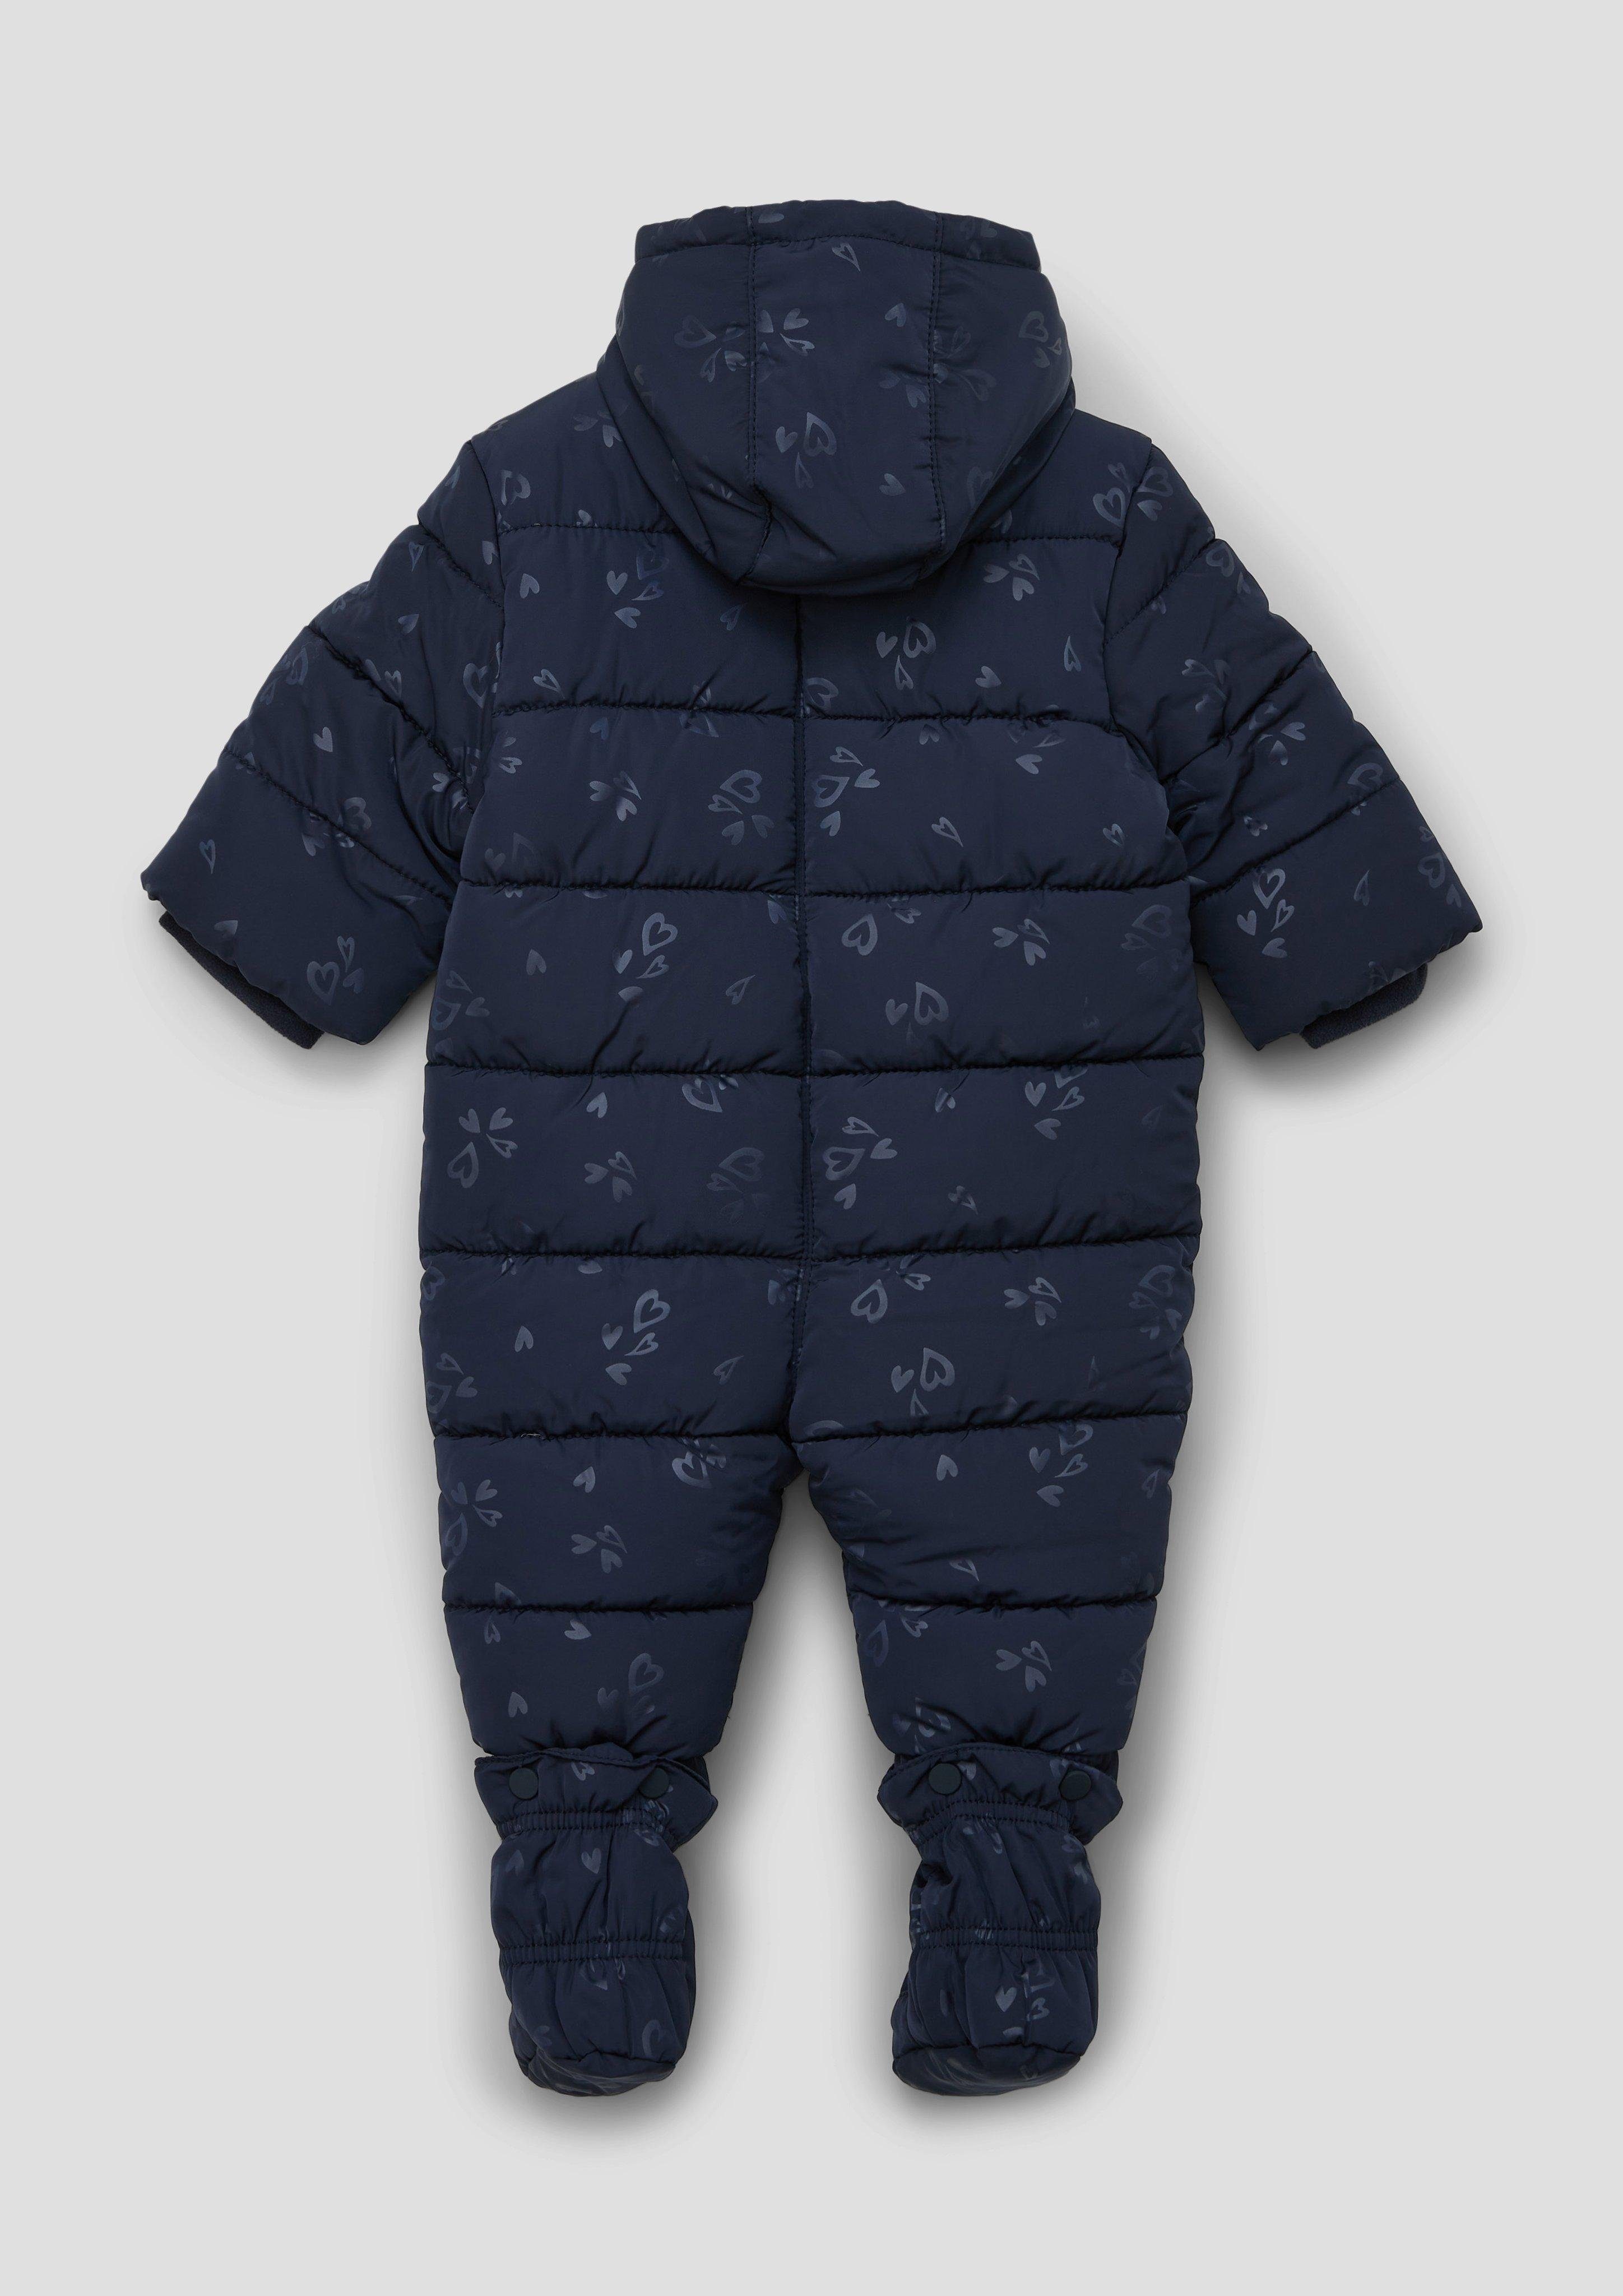 abnehmbaren mit Baby-Overall Overall s.Oliver Schleife Schuhen